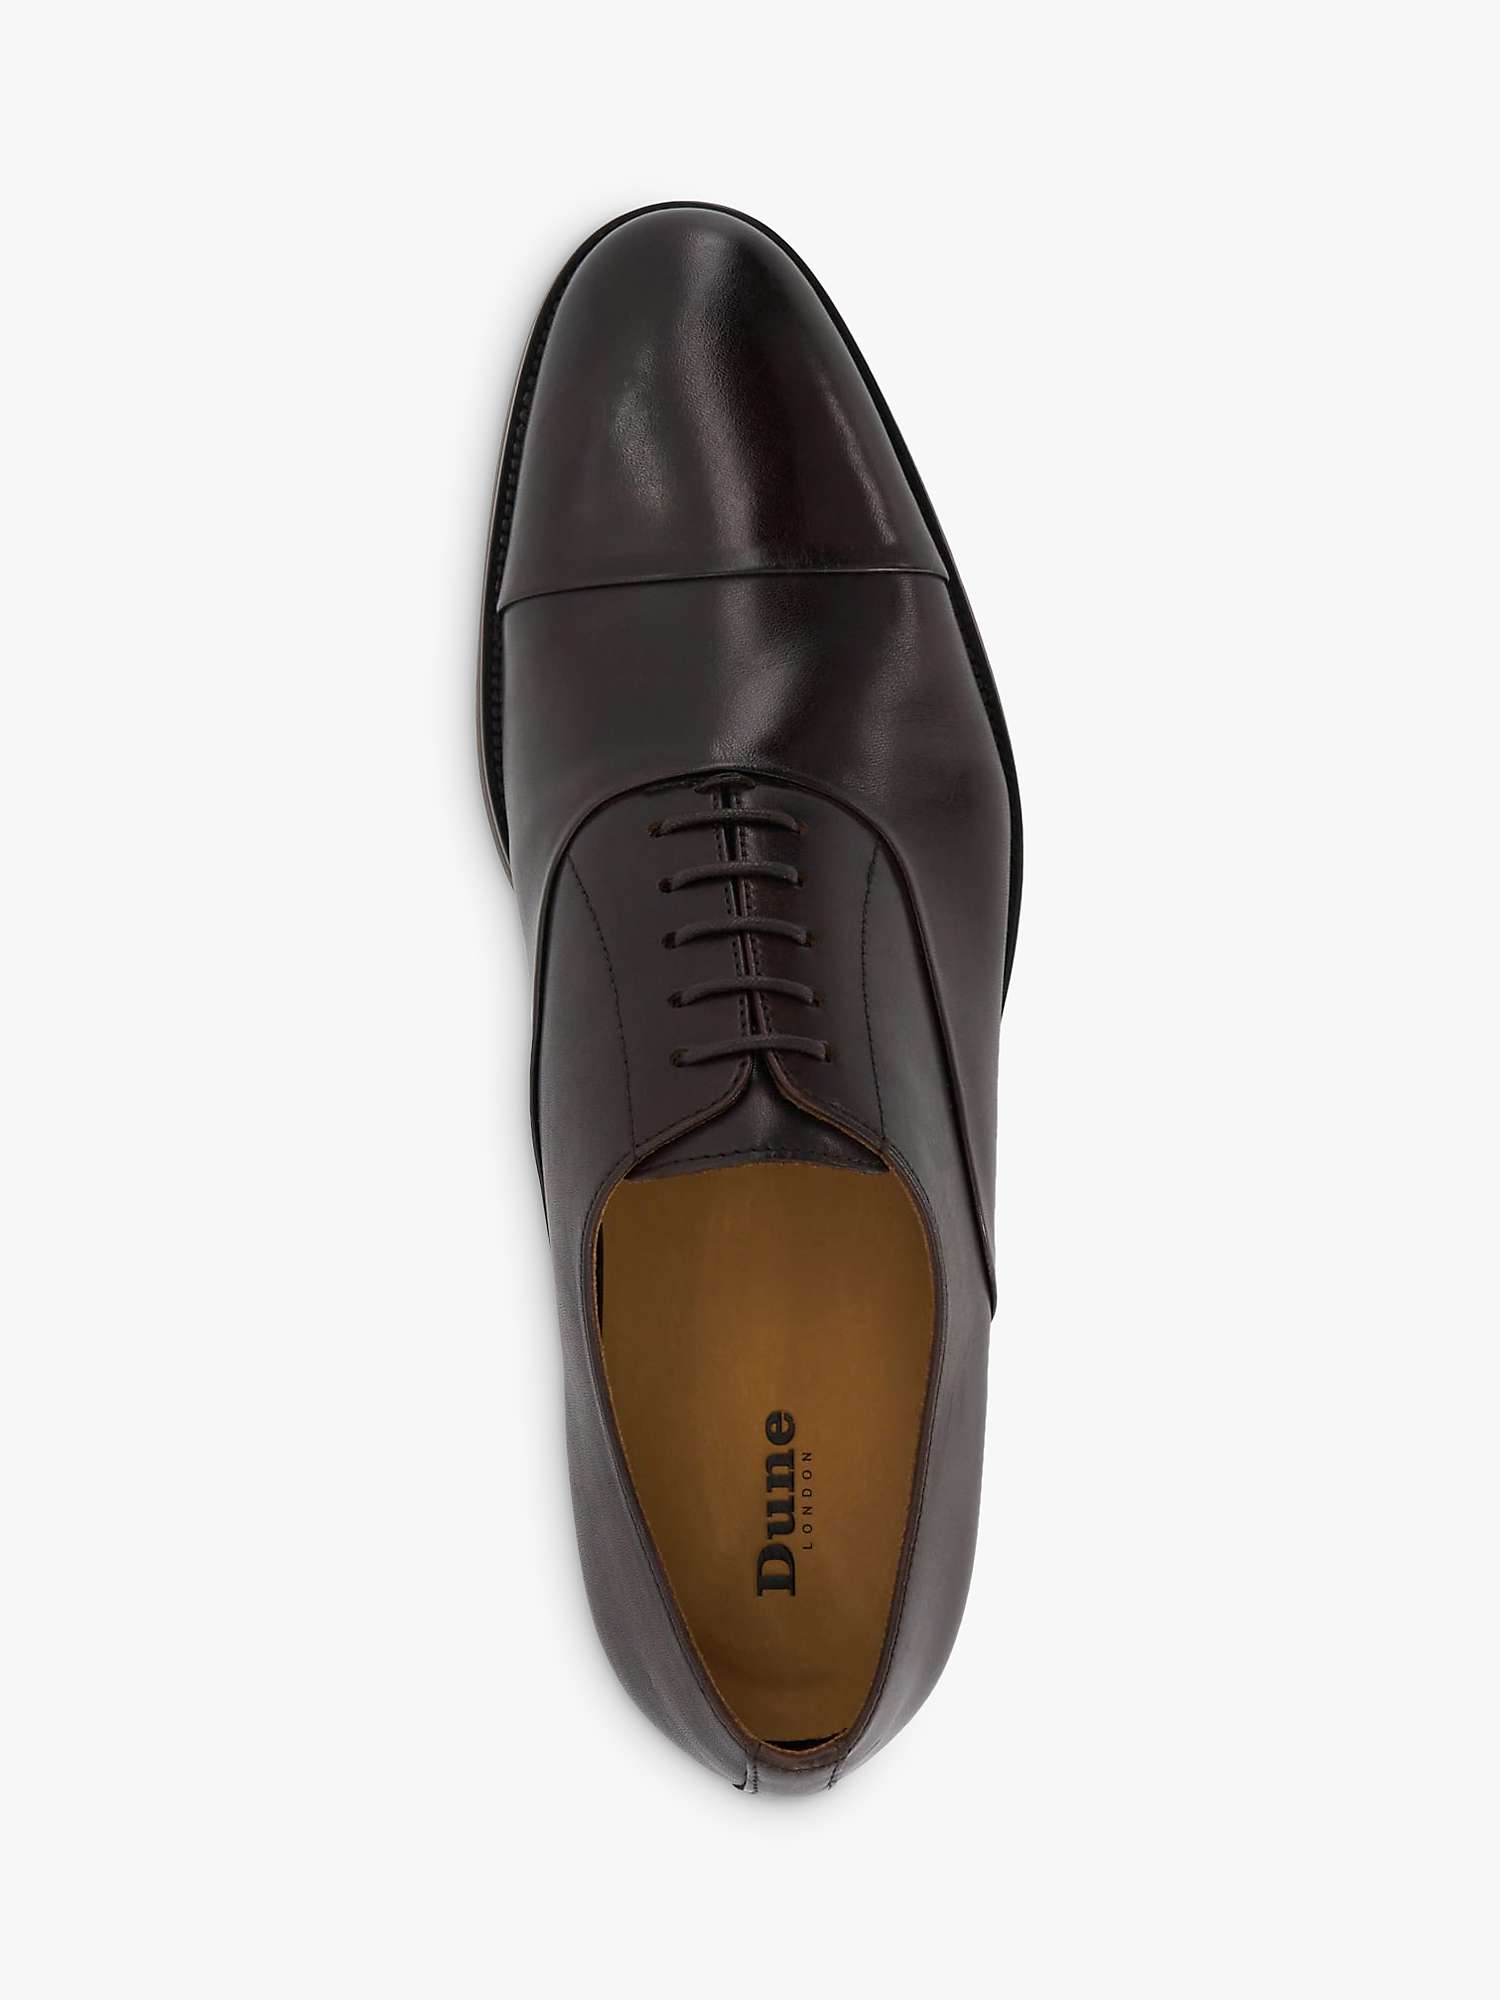 Dune Sebastian Lace Up Leather Shoes, Brown at John Lewis & Partners